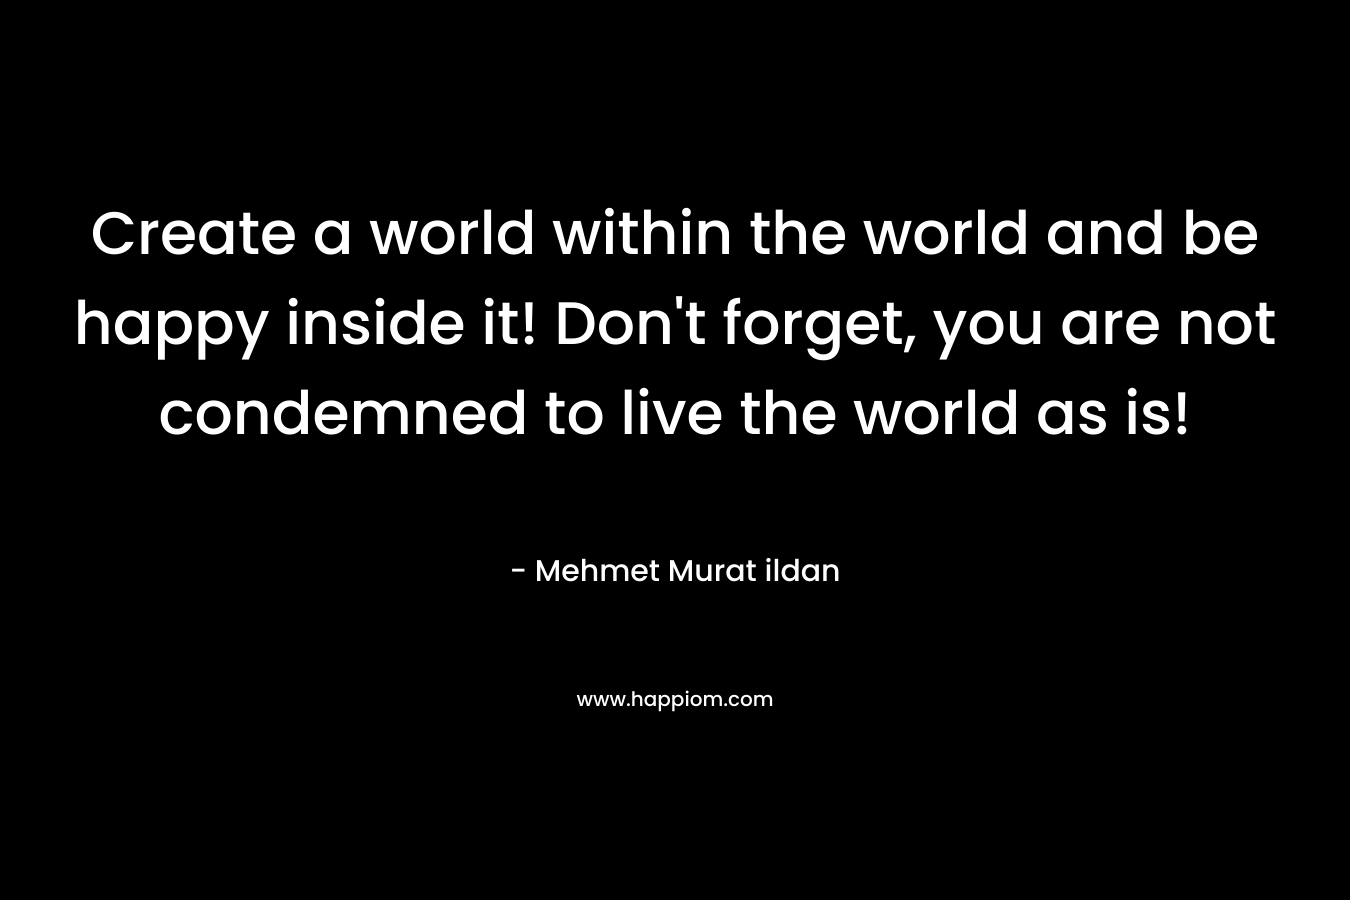 Create a world within the world and be happy inside it! Don't forget, you are not condemned to live the world as is!